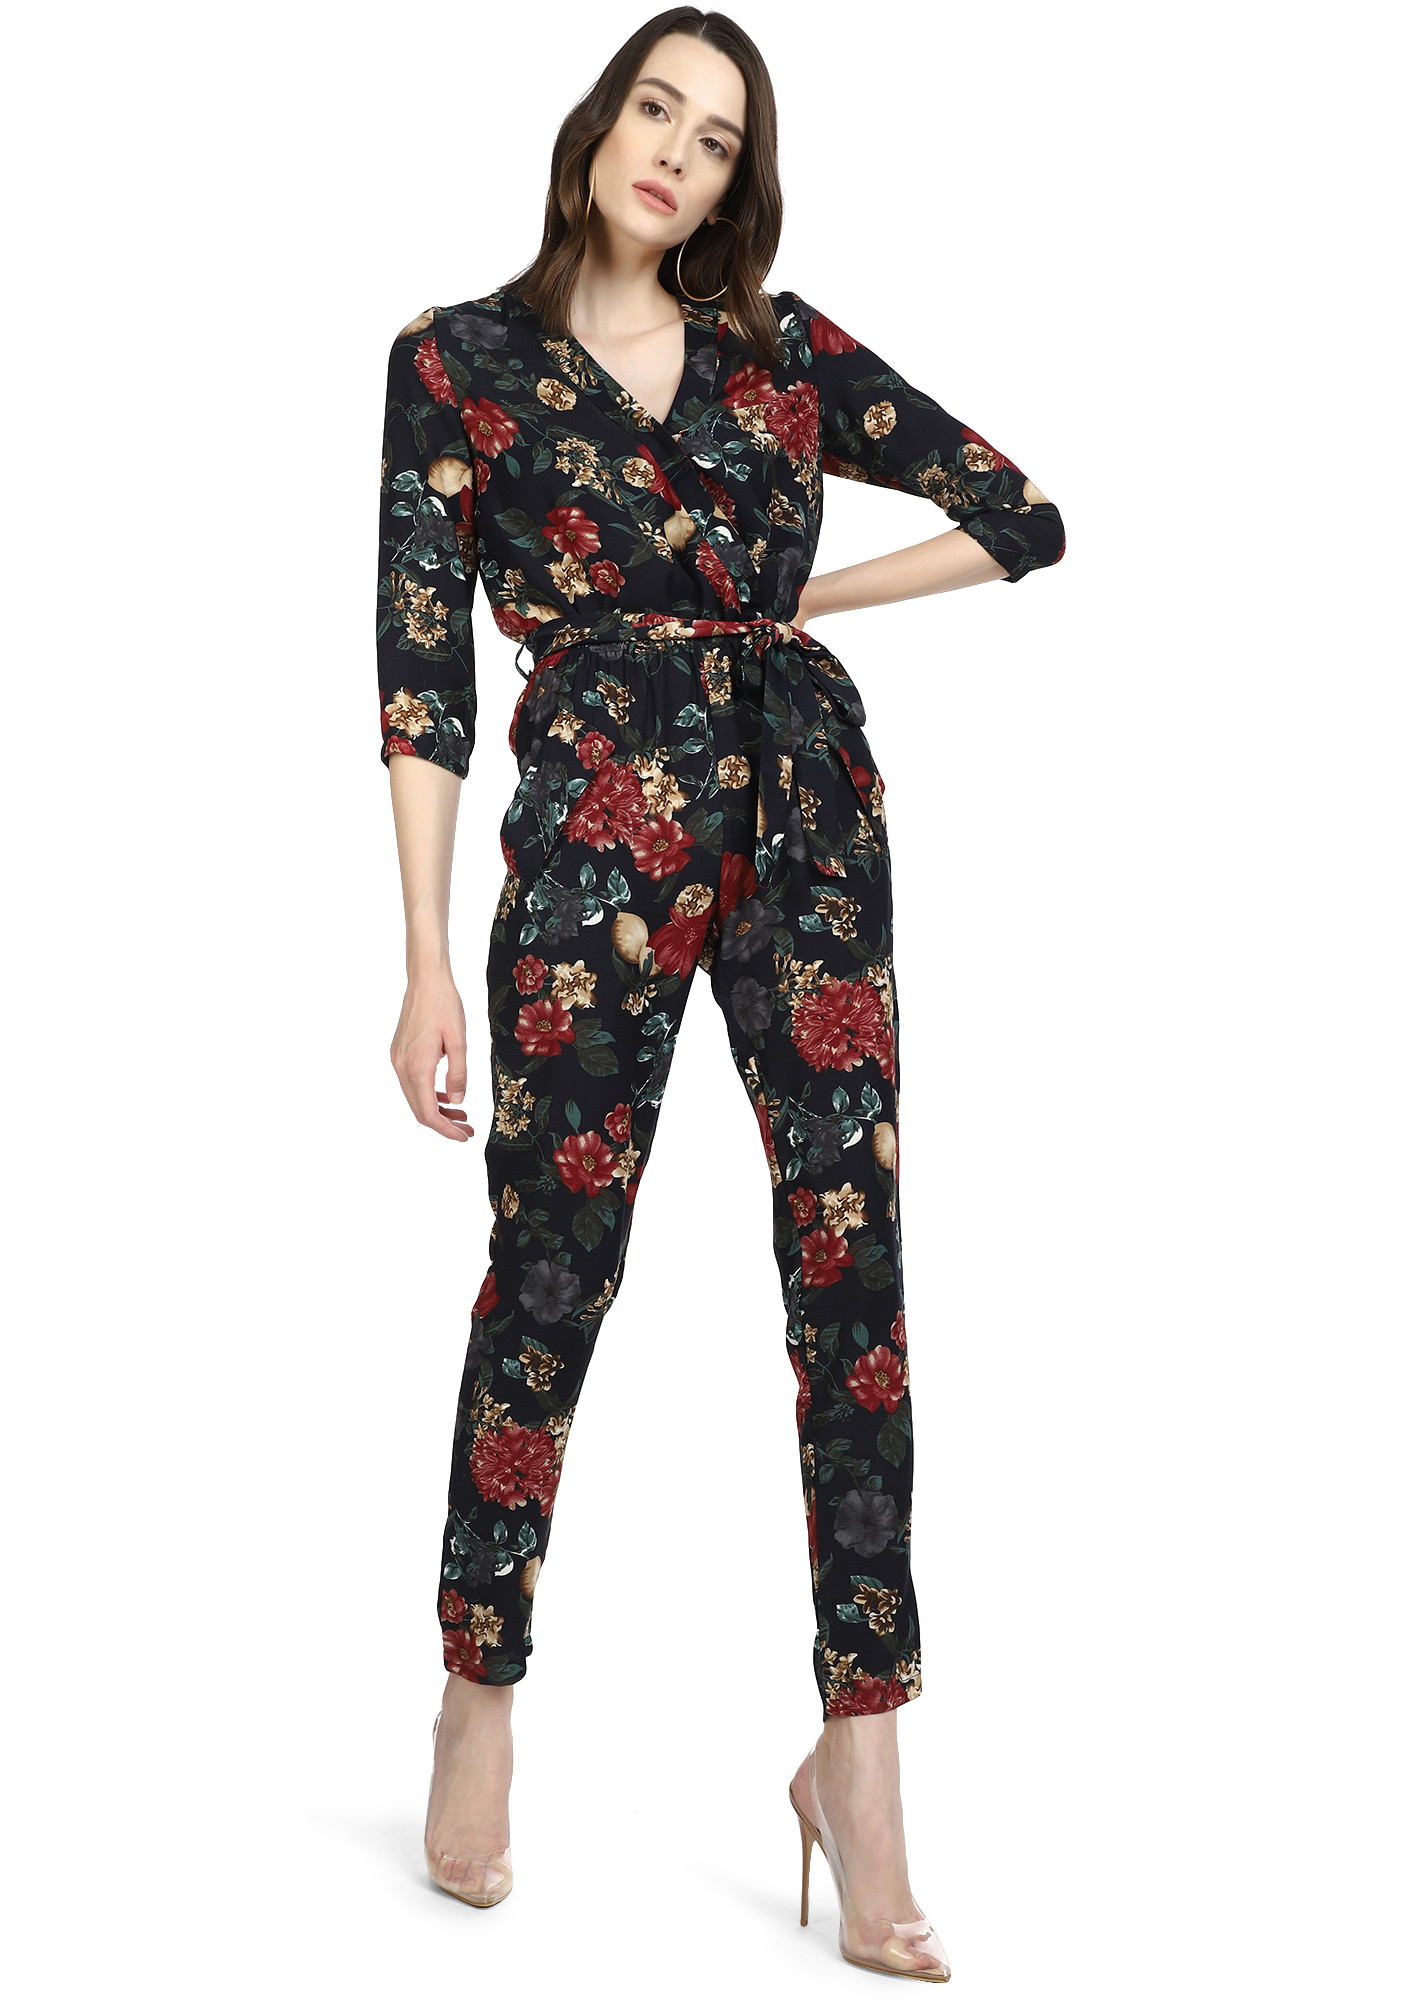 BLOOMING BABE BLACK JUMPSUIT